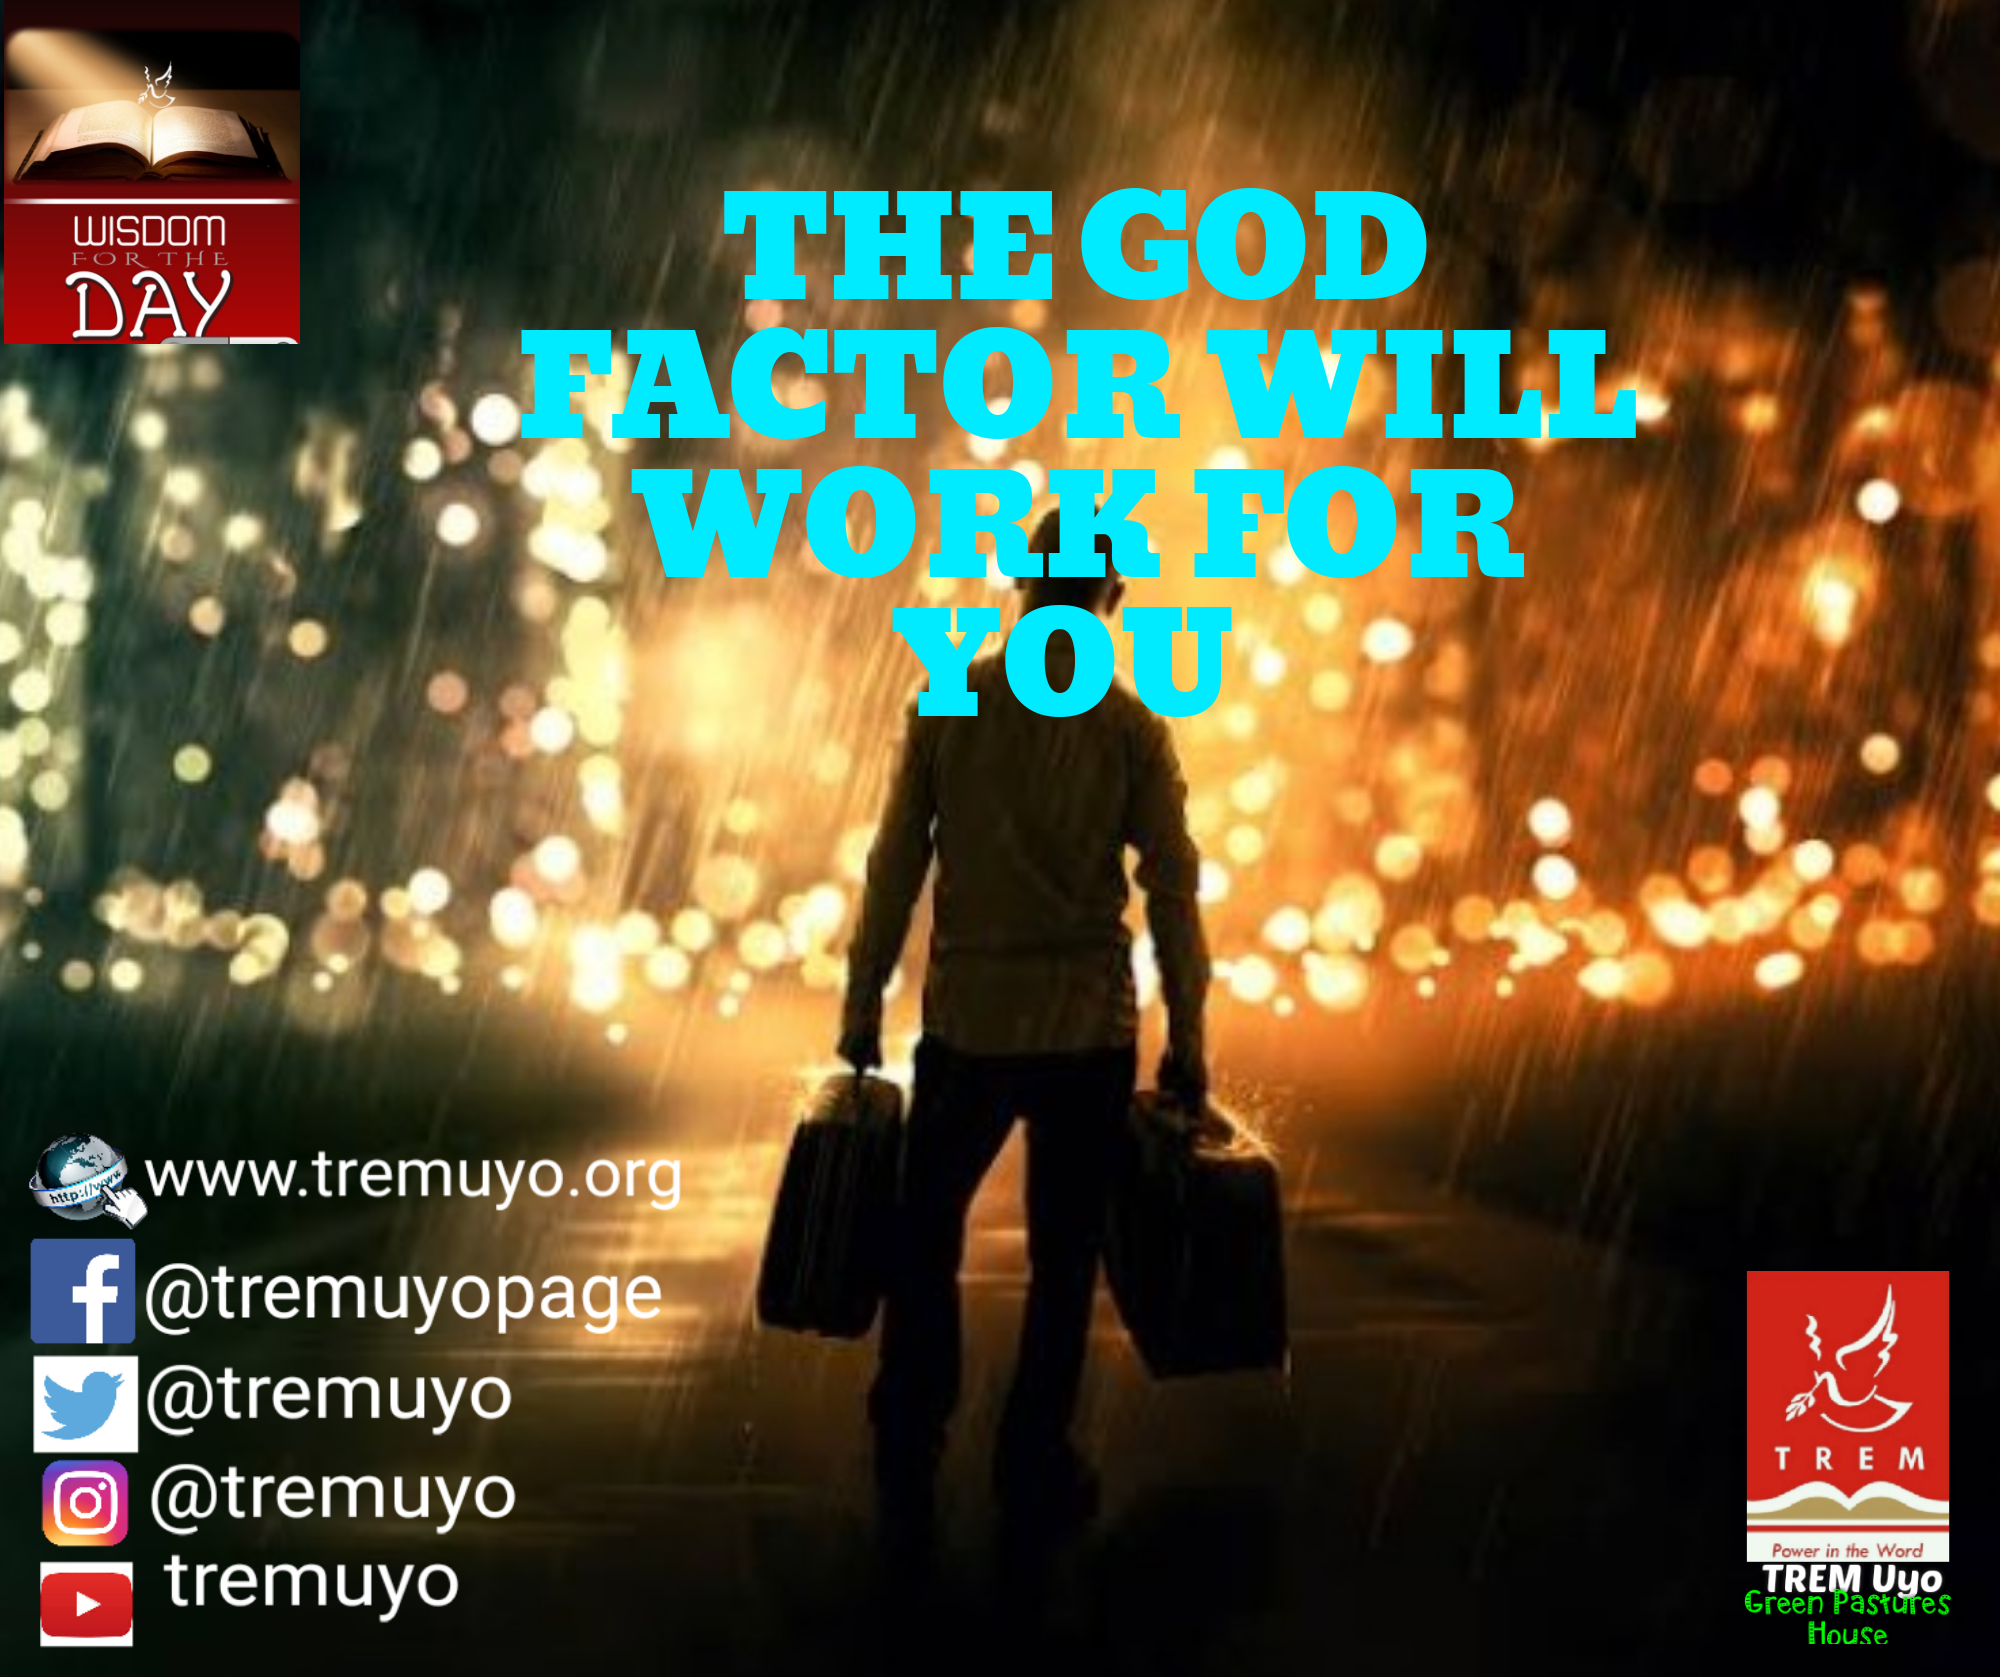 THE GOD FACTOR WILL WORK FOR YOU